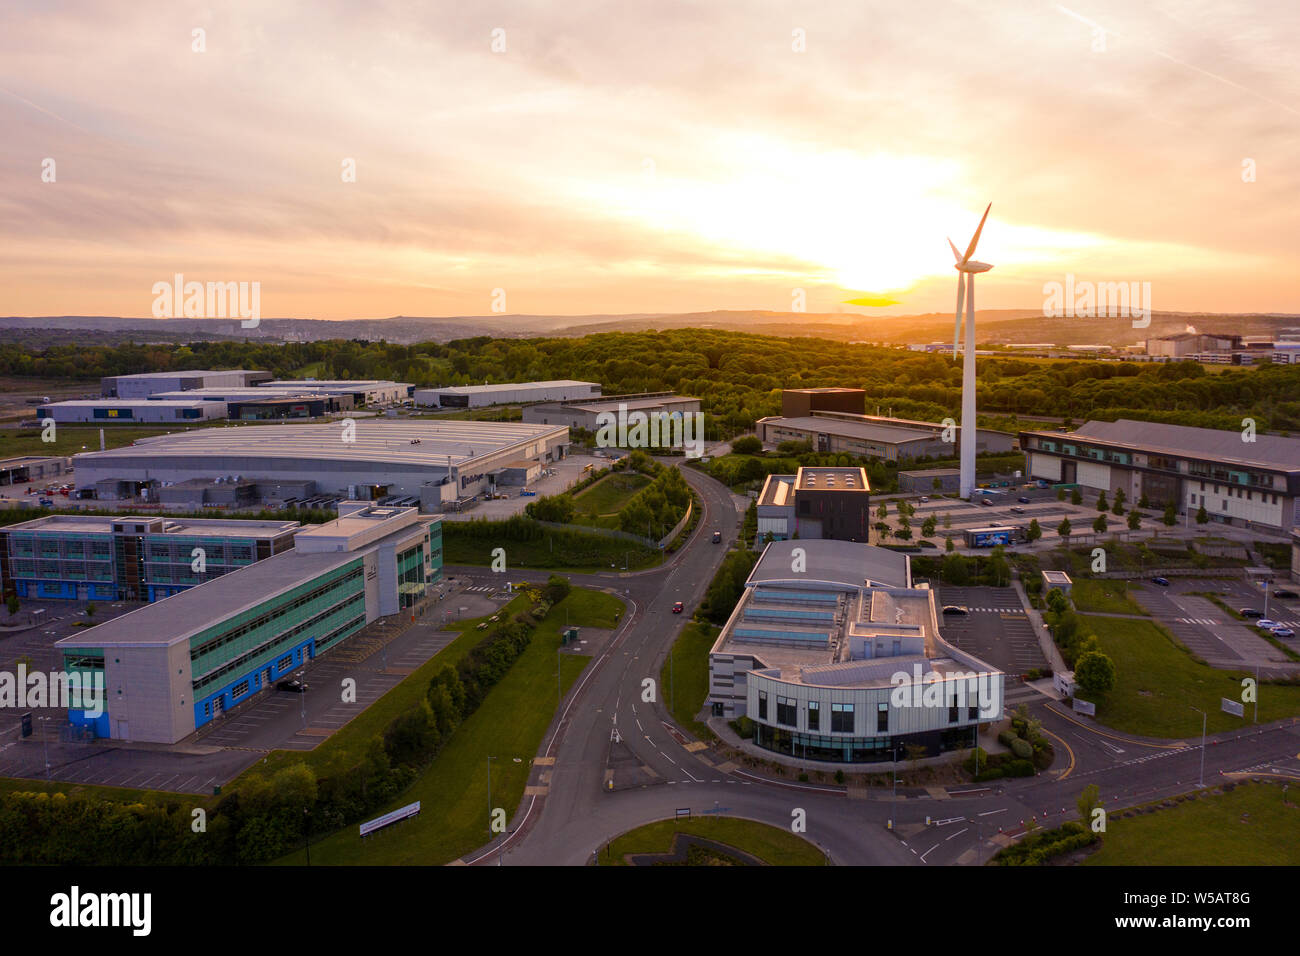 Aerial shot of the advanced manufacturing research centre sheffield. Taken during a beautiful sunset in May of 2019 Stock Photo